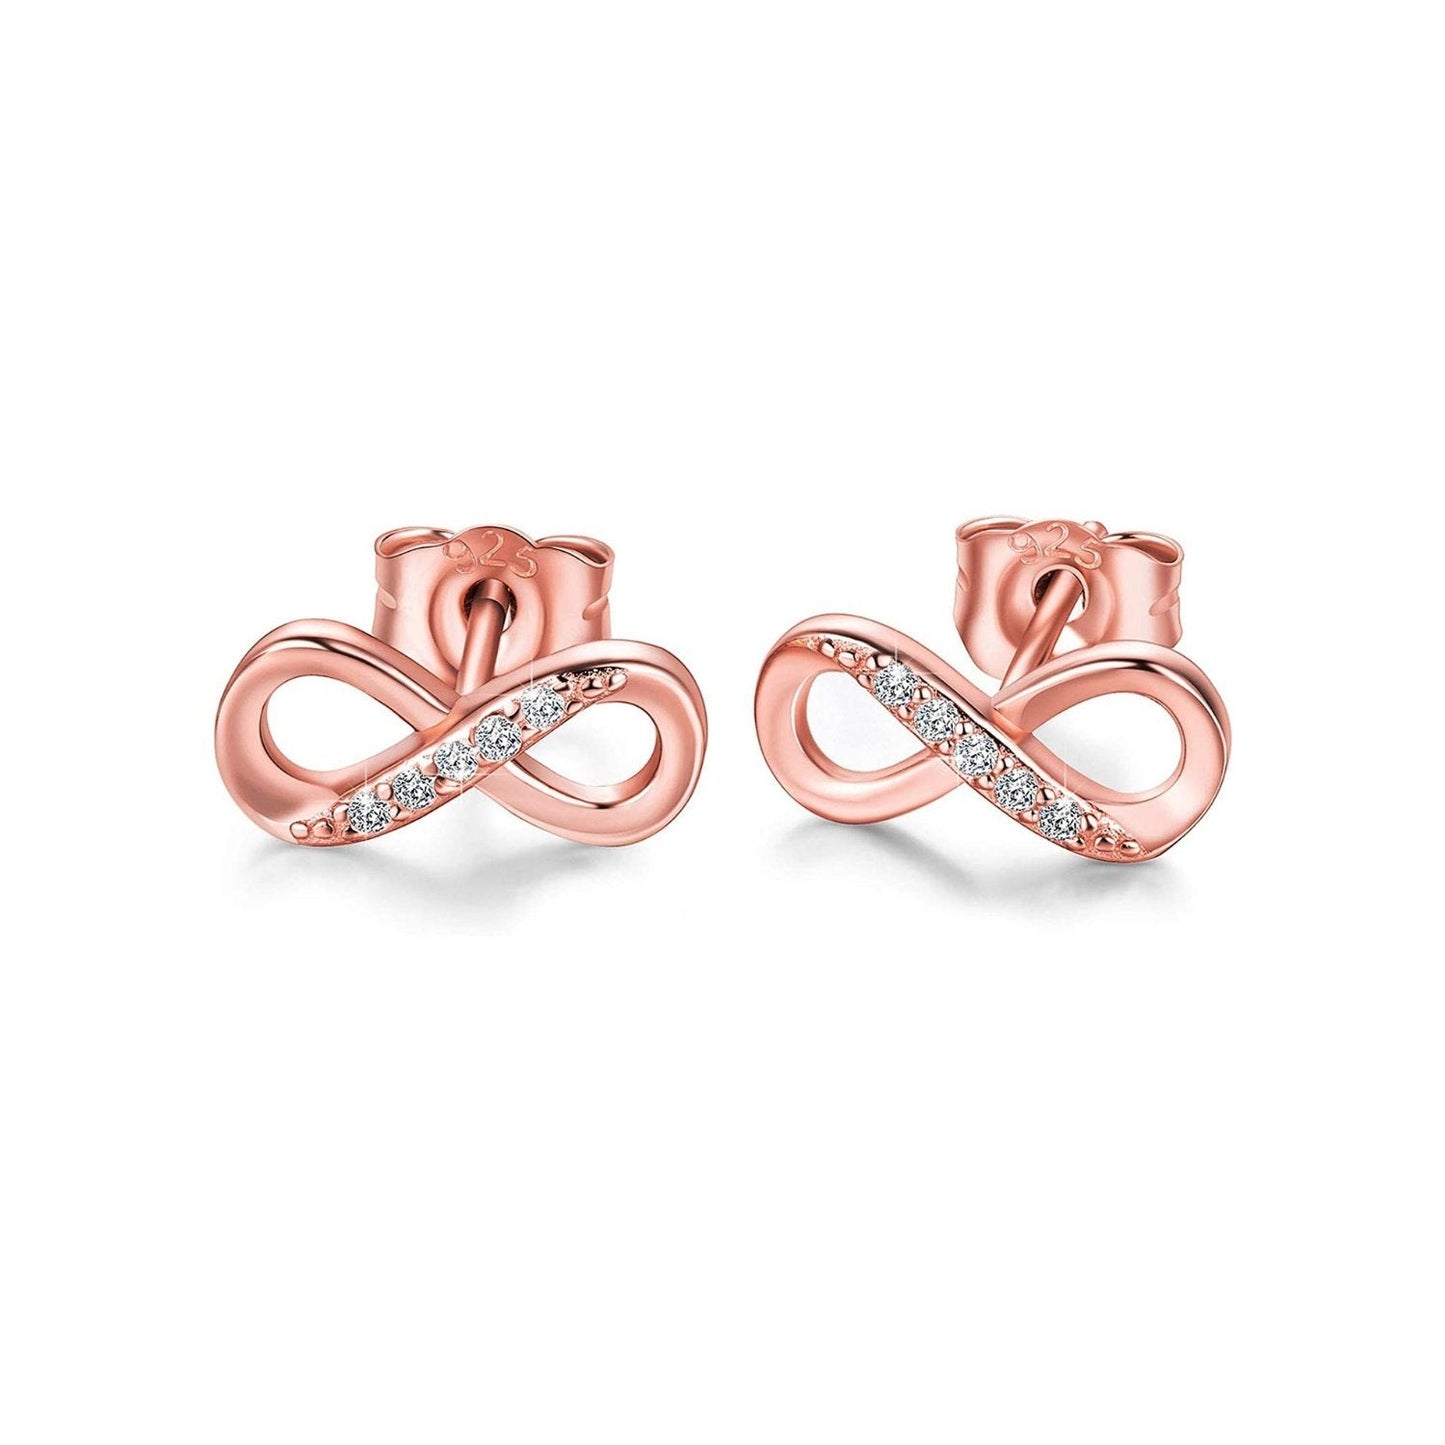 Rose Gold Infinity Stud Earrings in 92.5 Silver studded with Swiss Zirconia - 18K Rose Gold finish